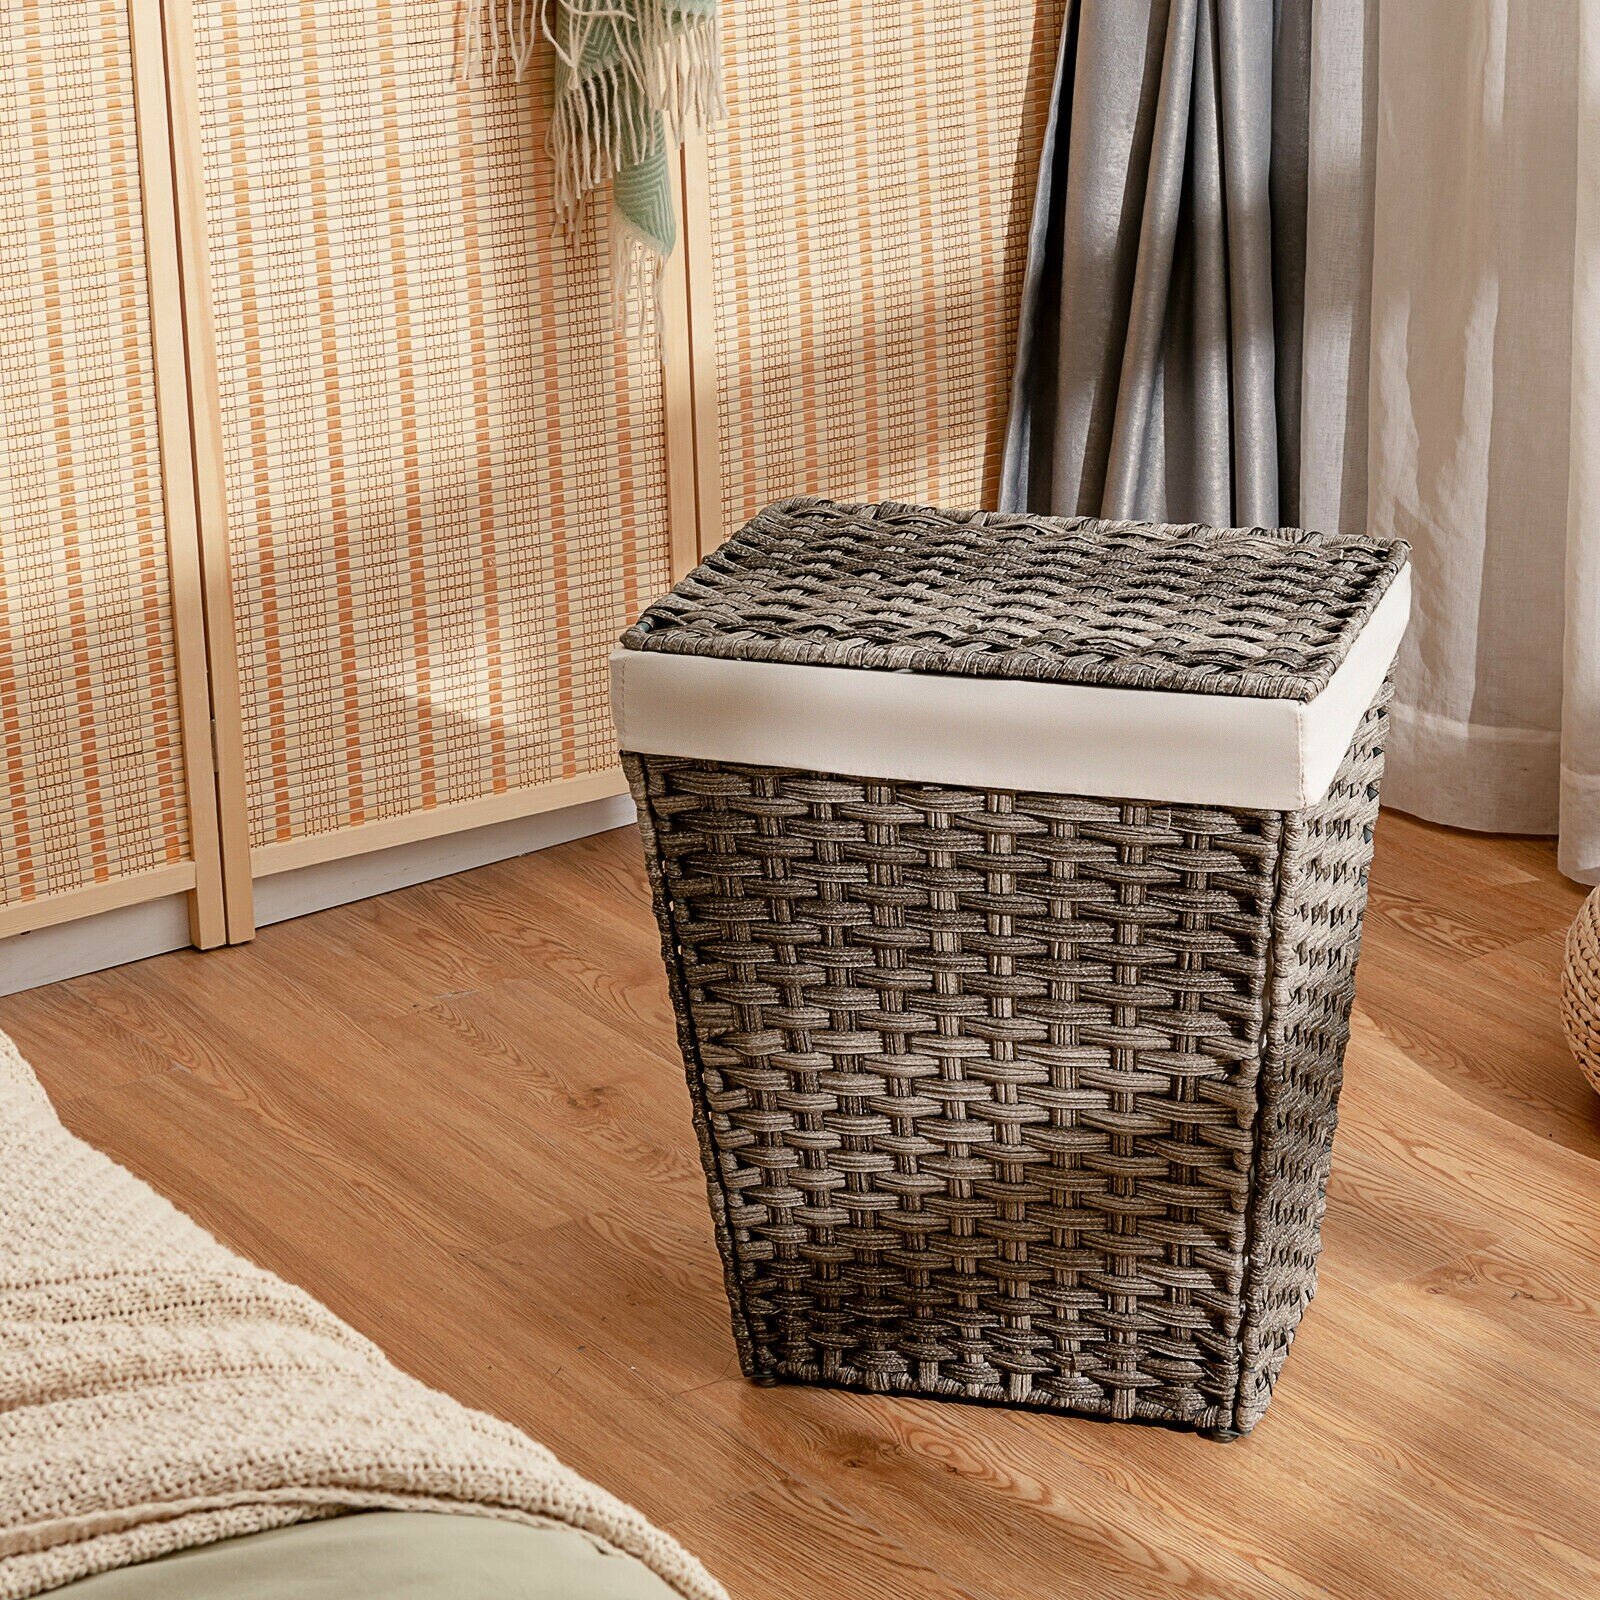 Honey-Can-Do Collapsible Square Hamper with Lid